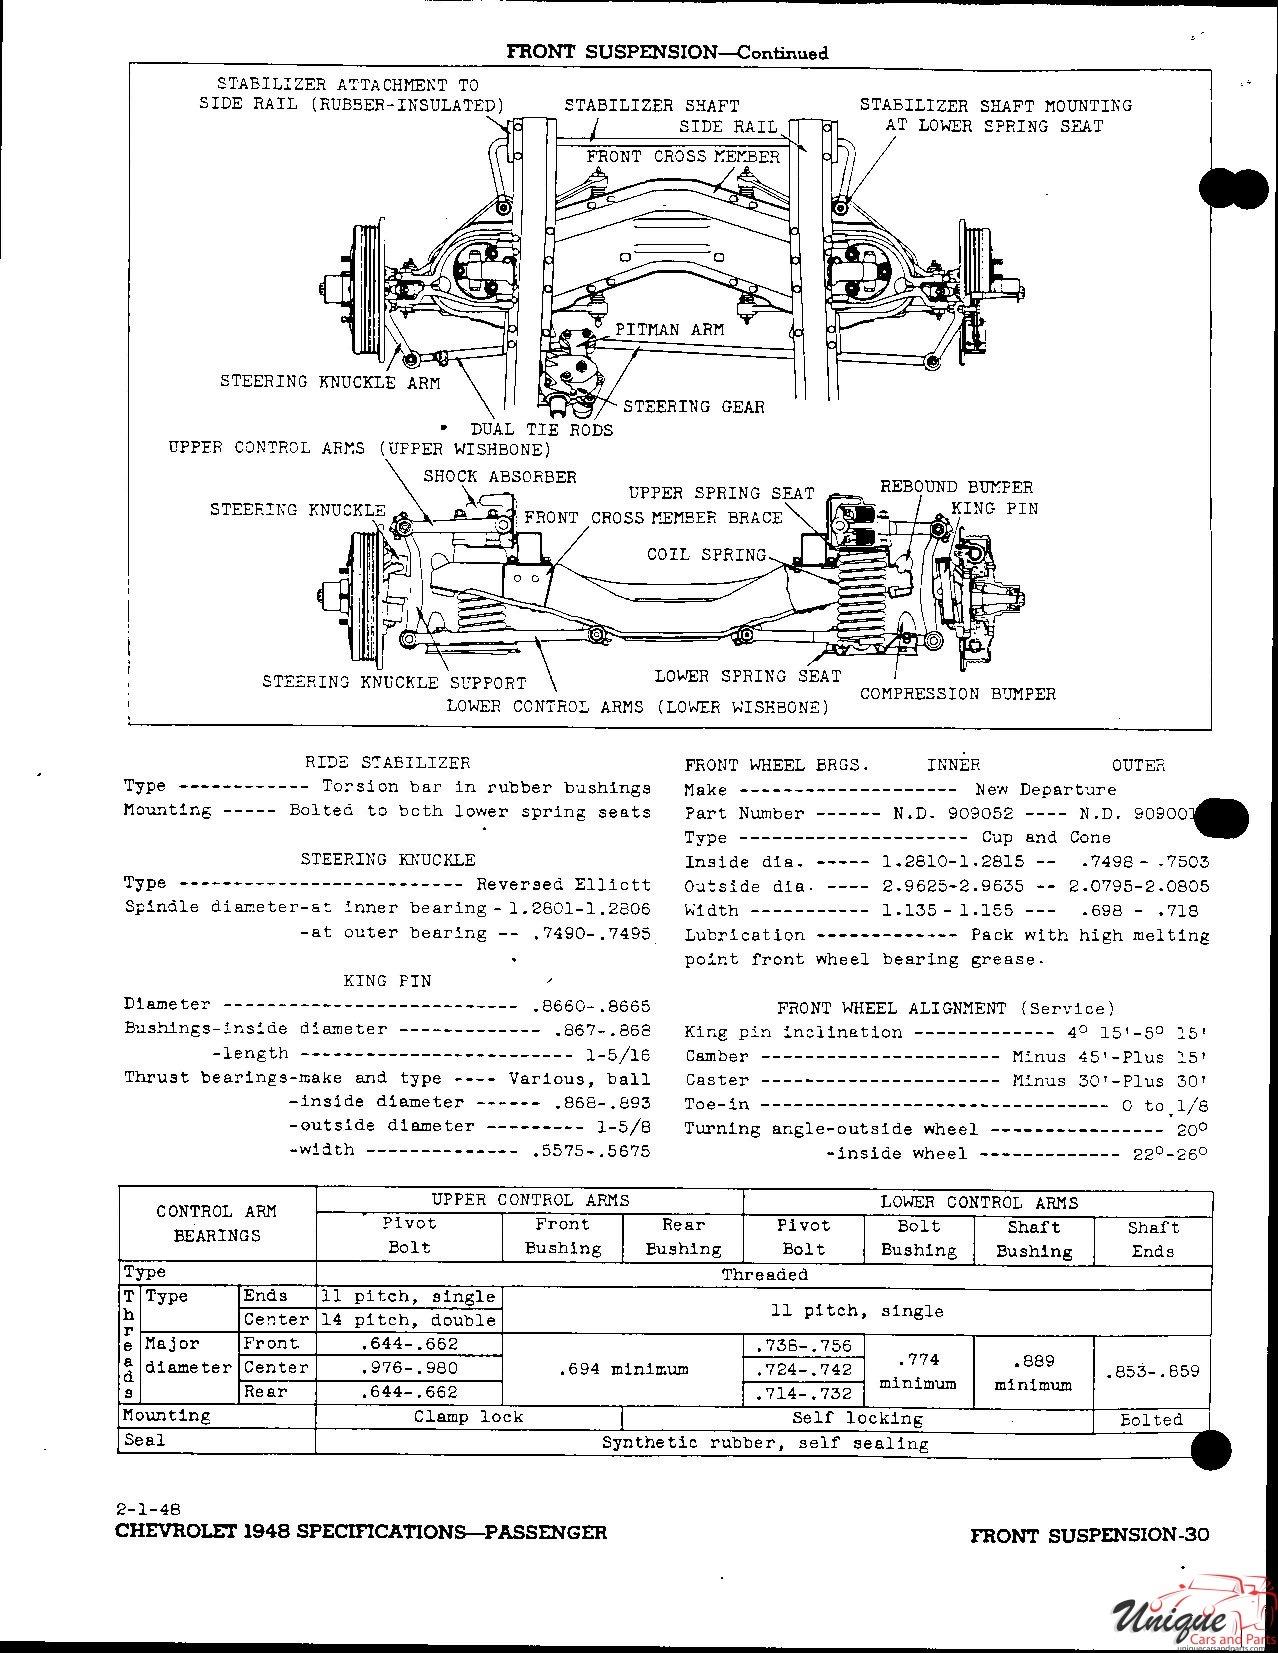 1948 Chevrolet Specifications Page 35